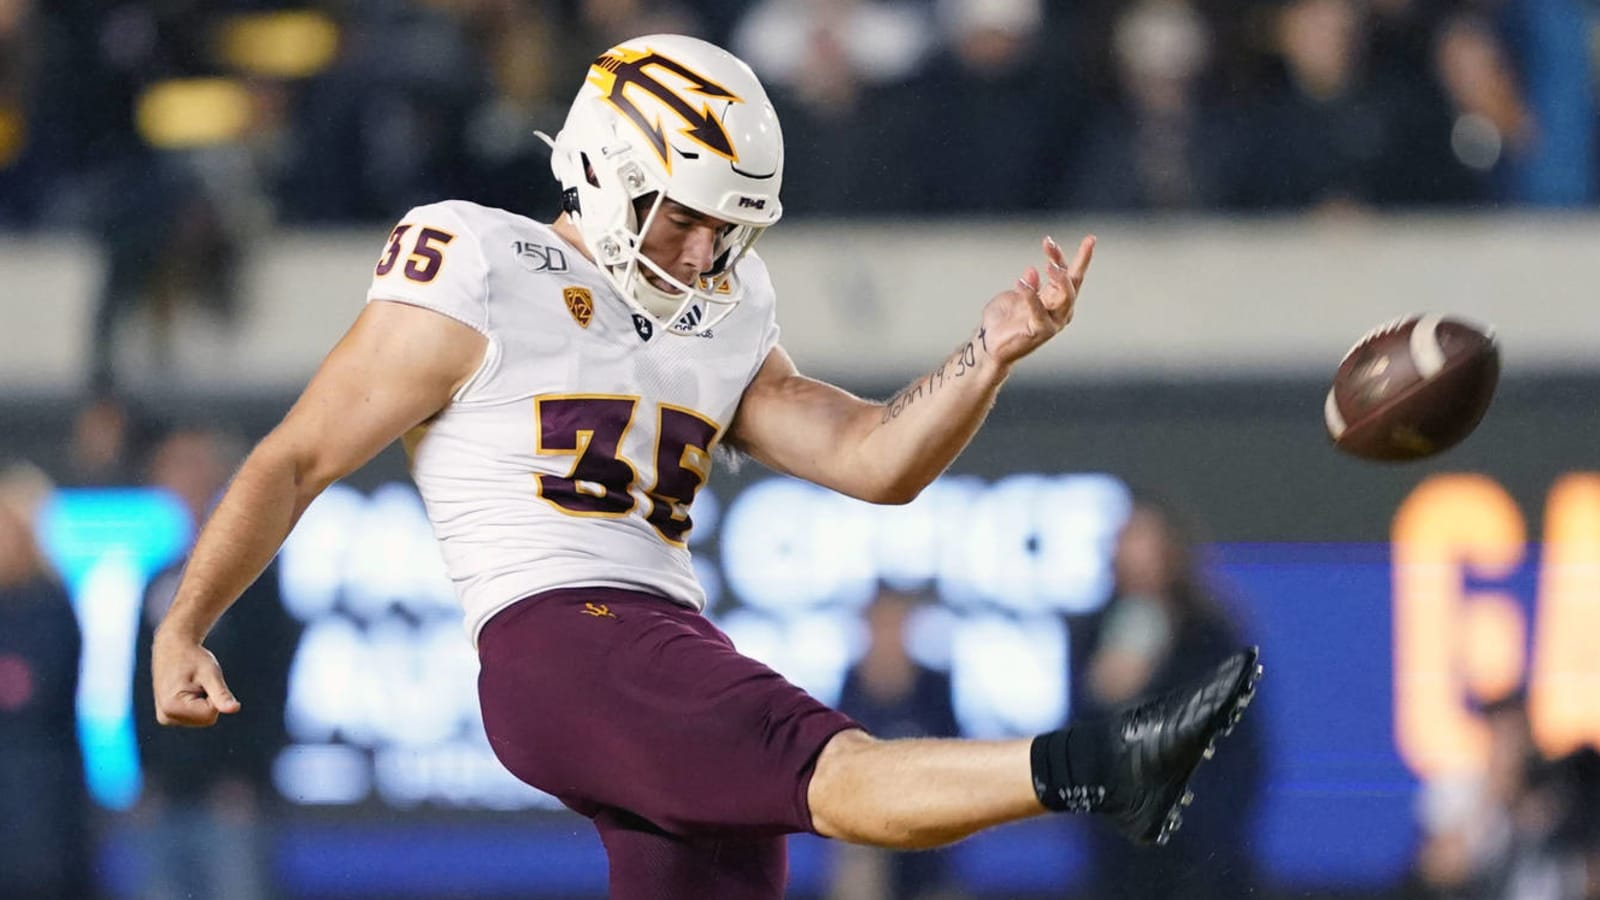 Michael Turk can return to ASU after getting historic waiver from NCAA